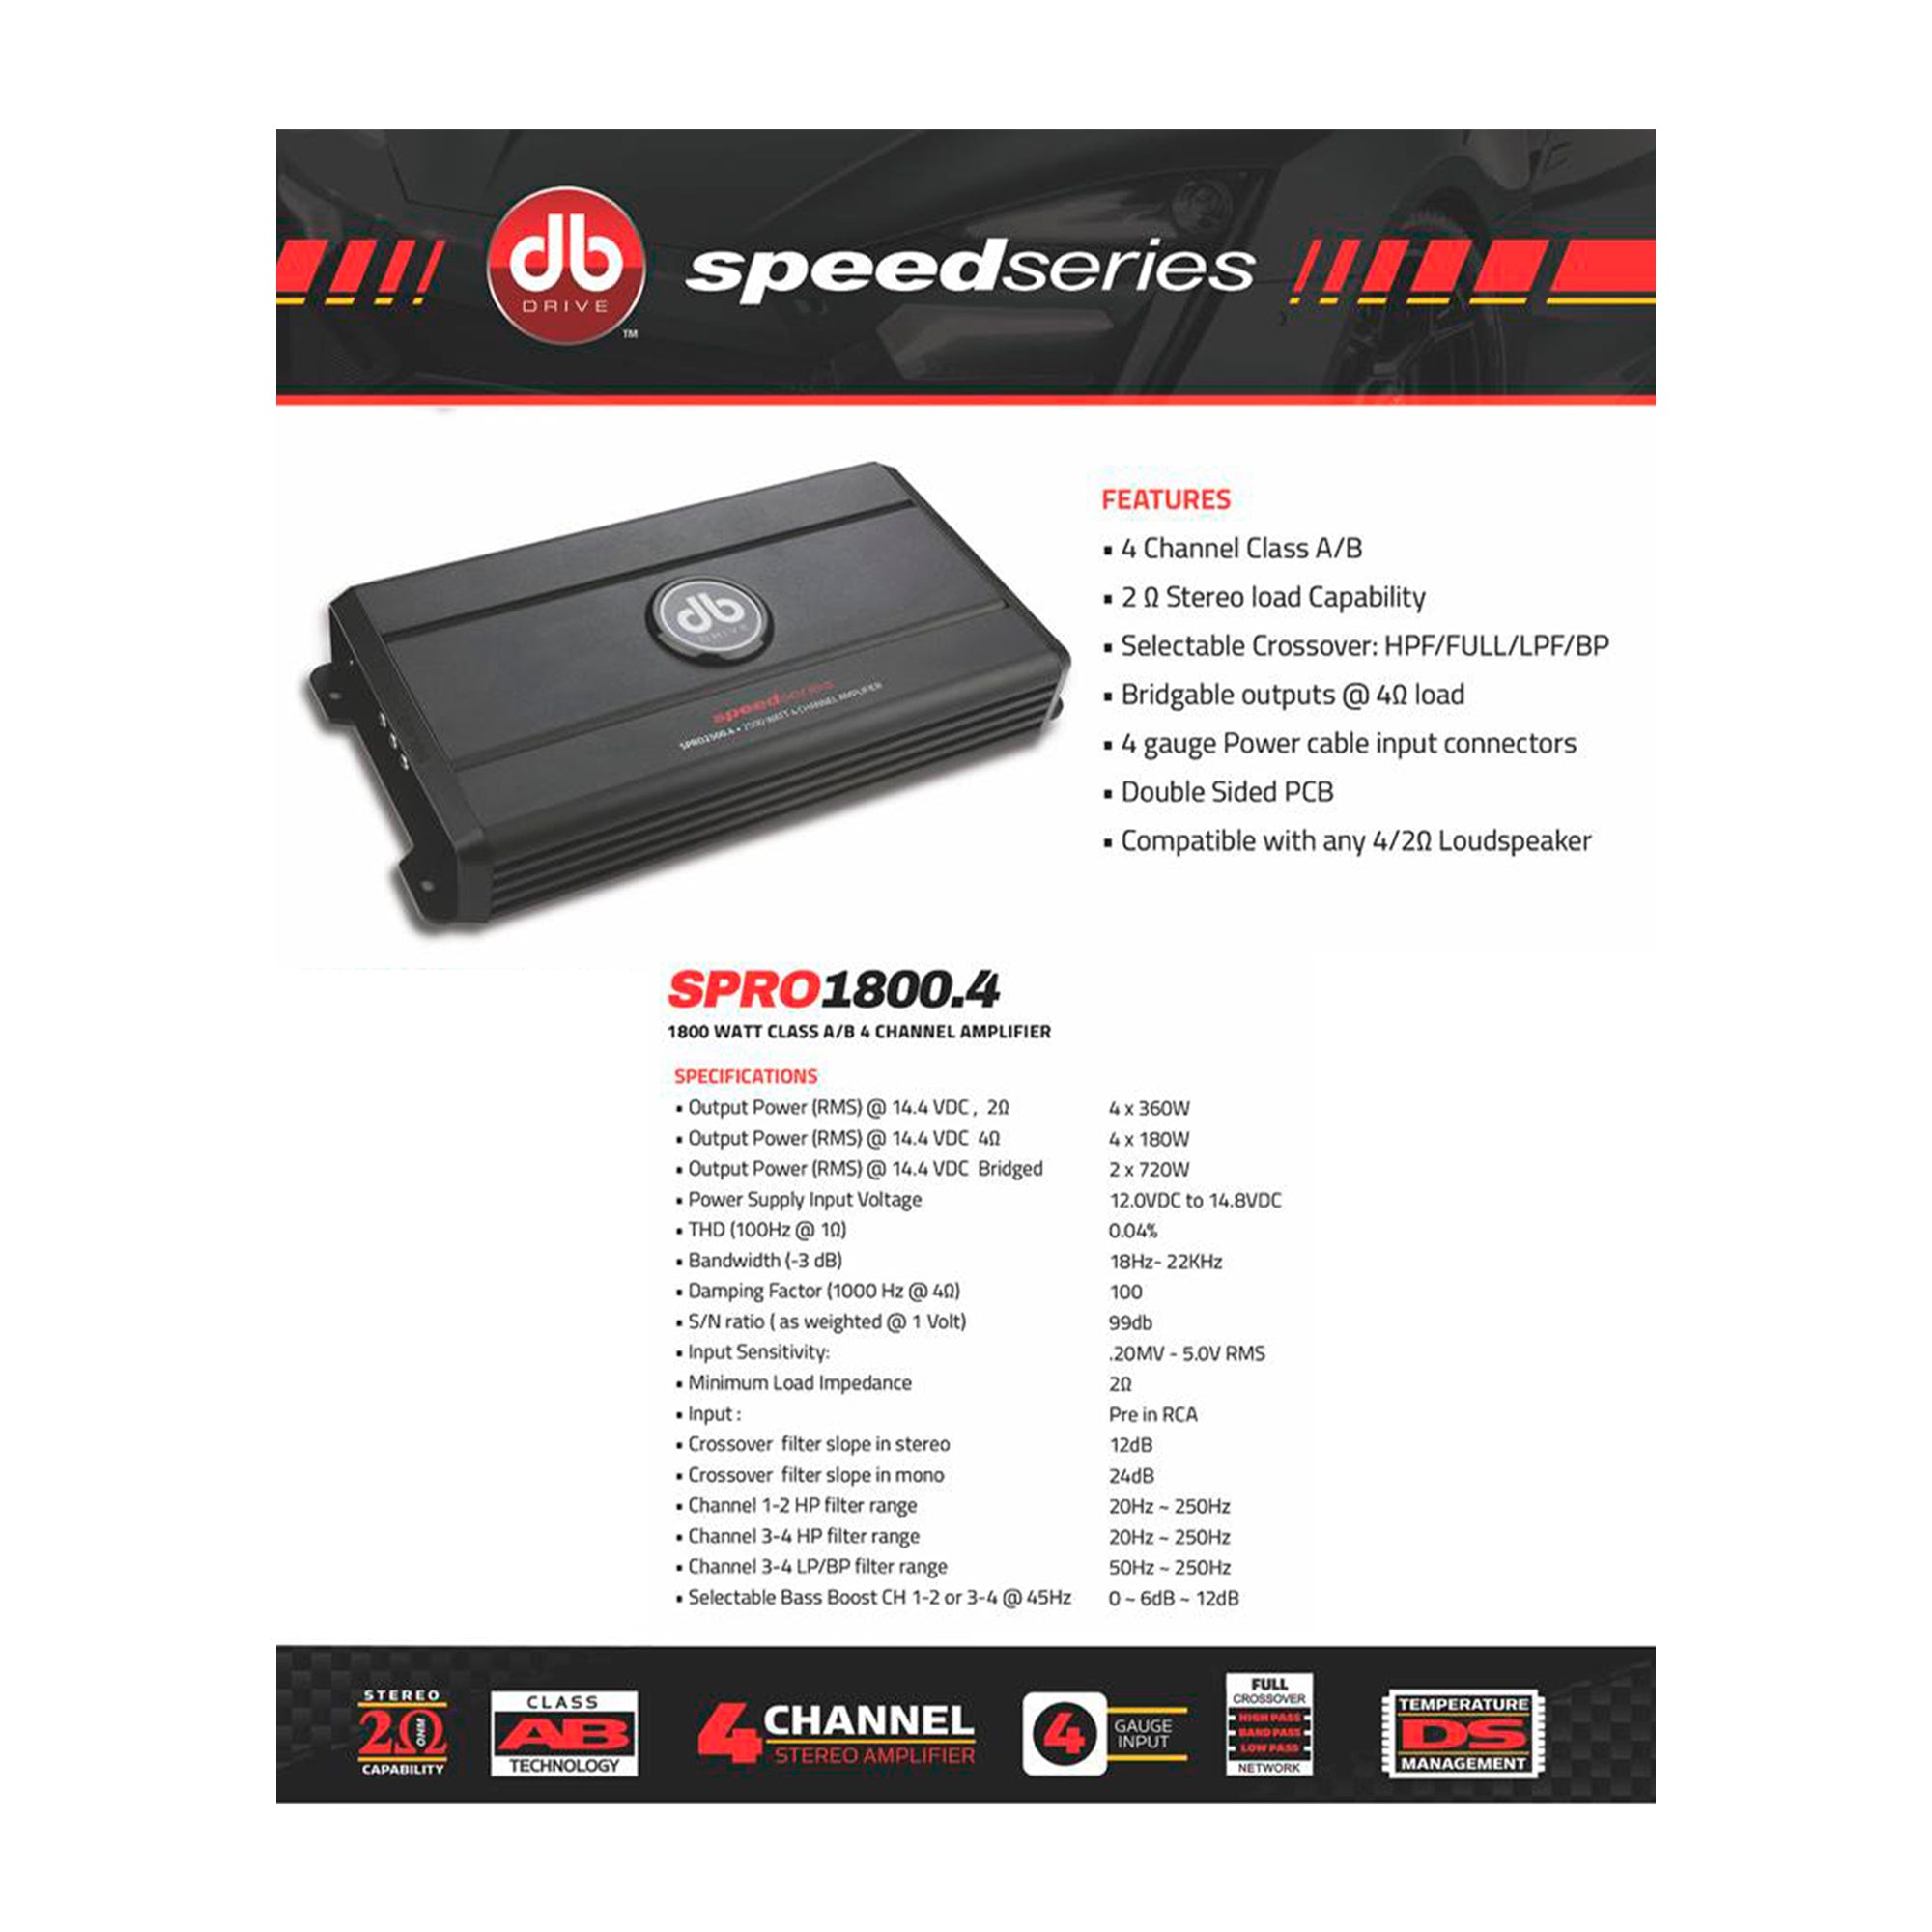 Amplificador 4 Canales DB Drive SPRO1800.4 1800 Watts Clase AB 2 Ohms Speed Series